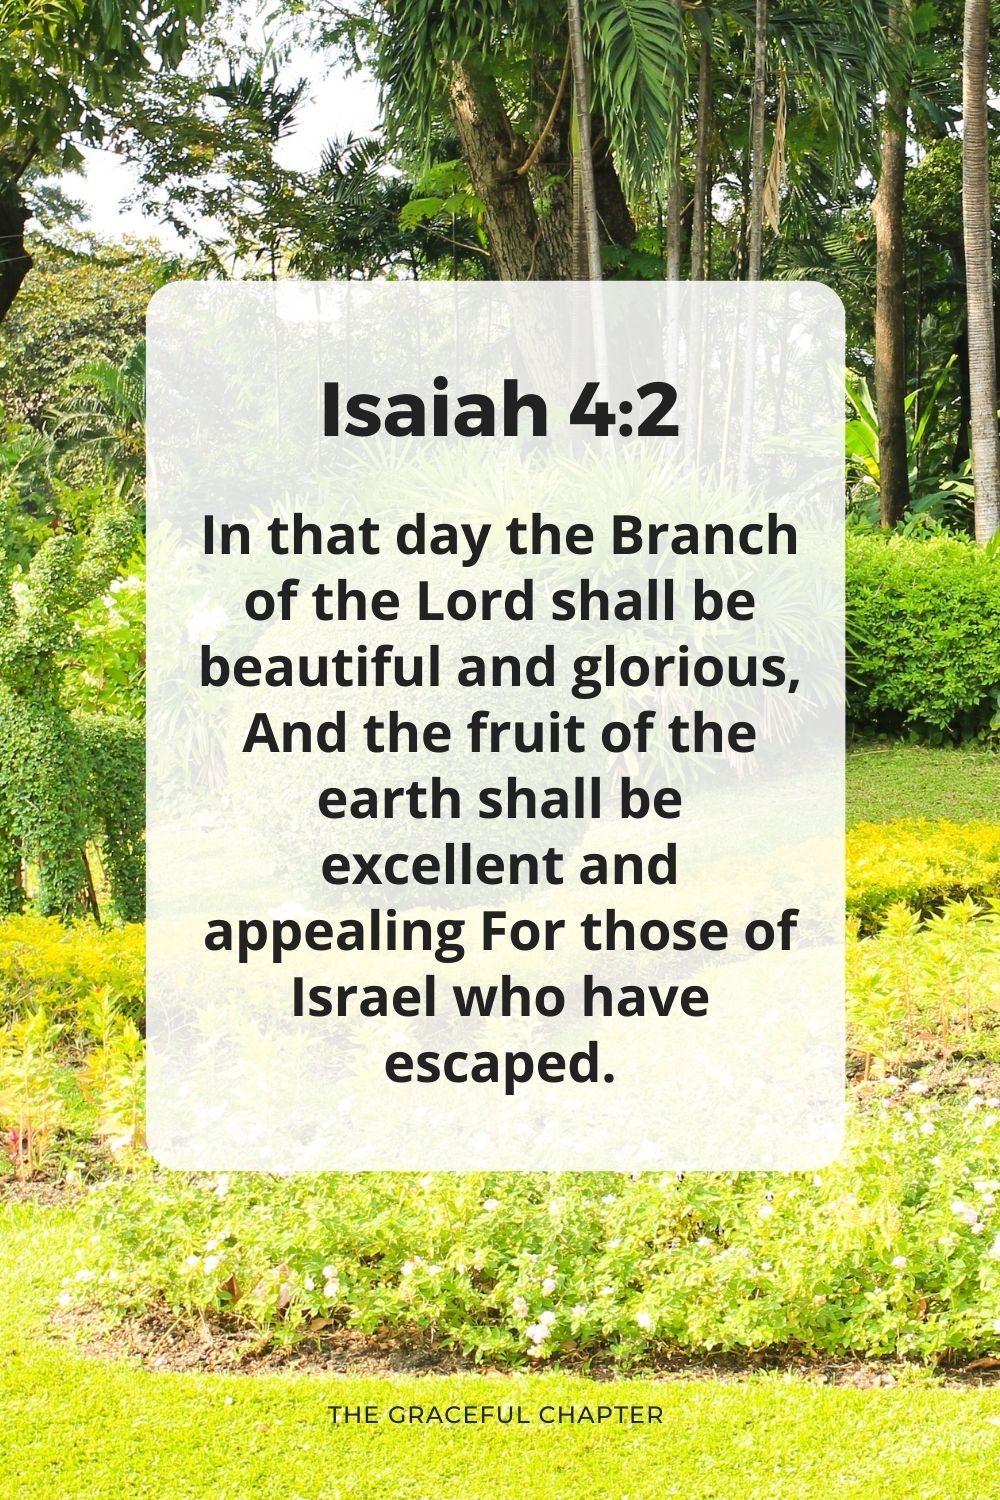 In that day the Branch of the Lord shall be beautiful and glorious, And the fruit of the earth shall be excellent and appealing For those of Israel who have escaped.